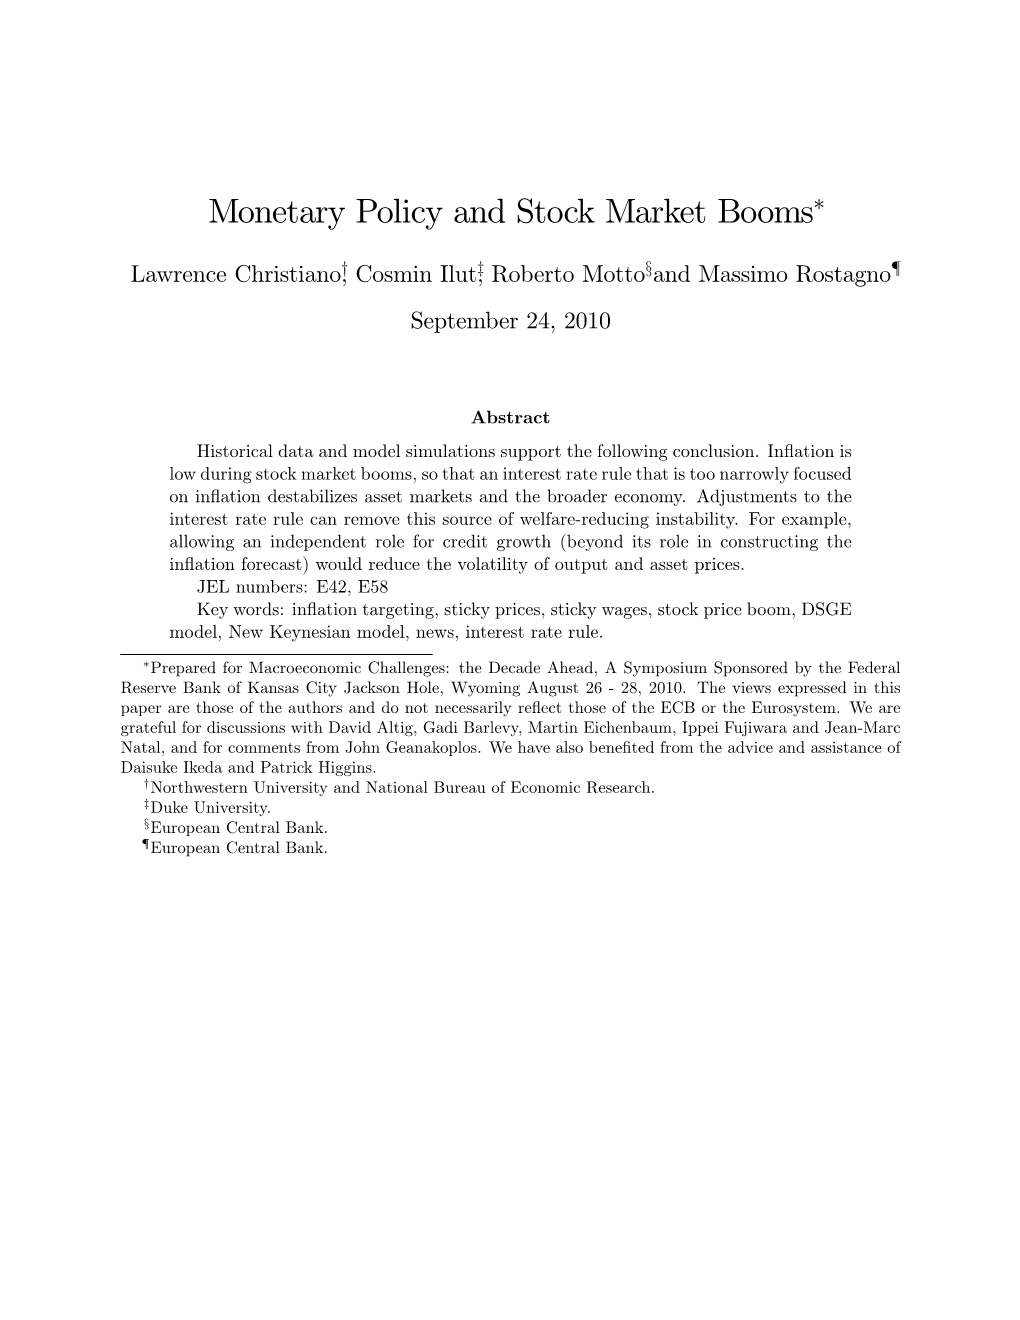 Monetary Policy and Stock Market Booms"